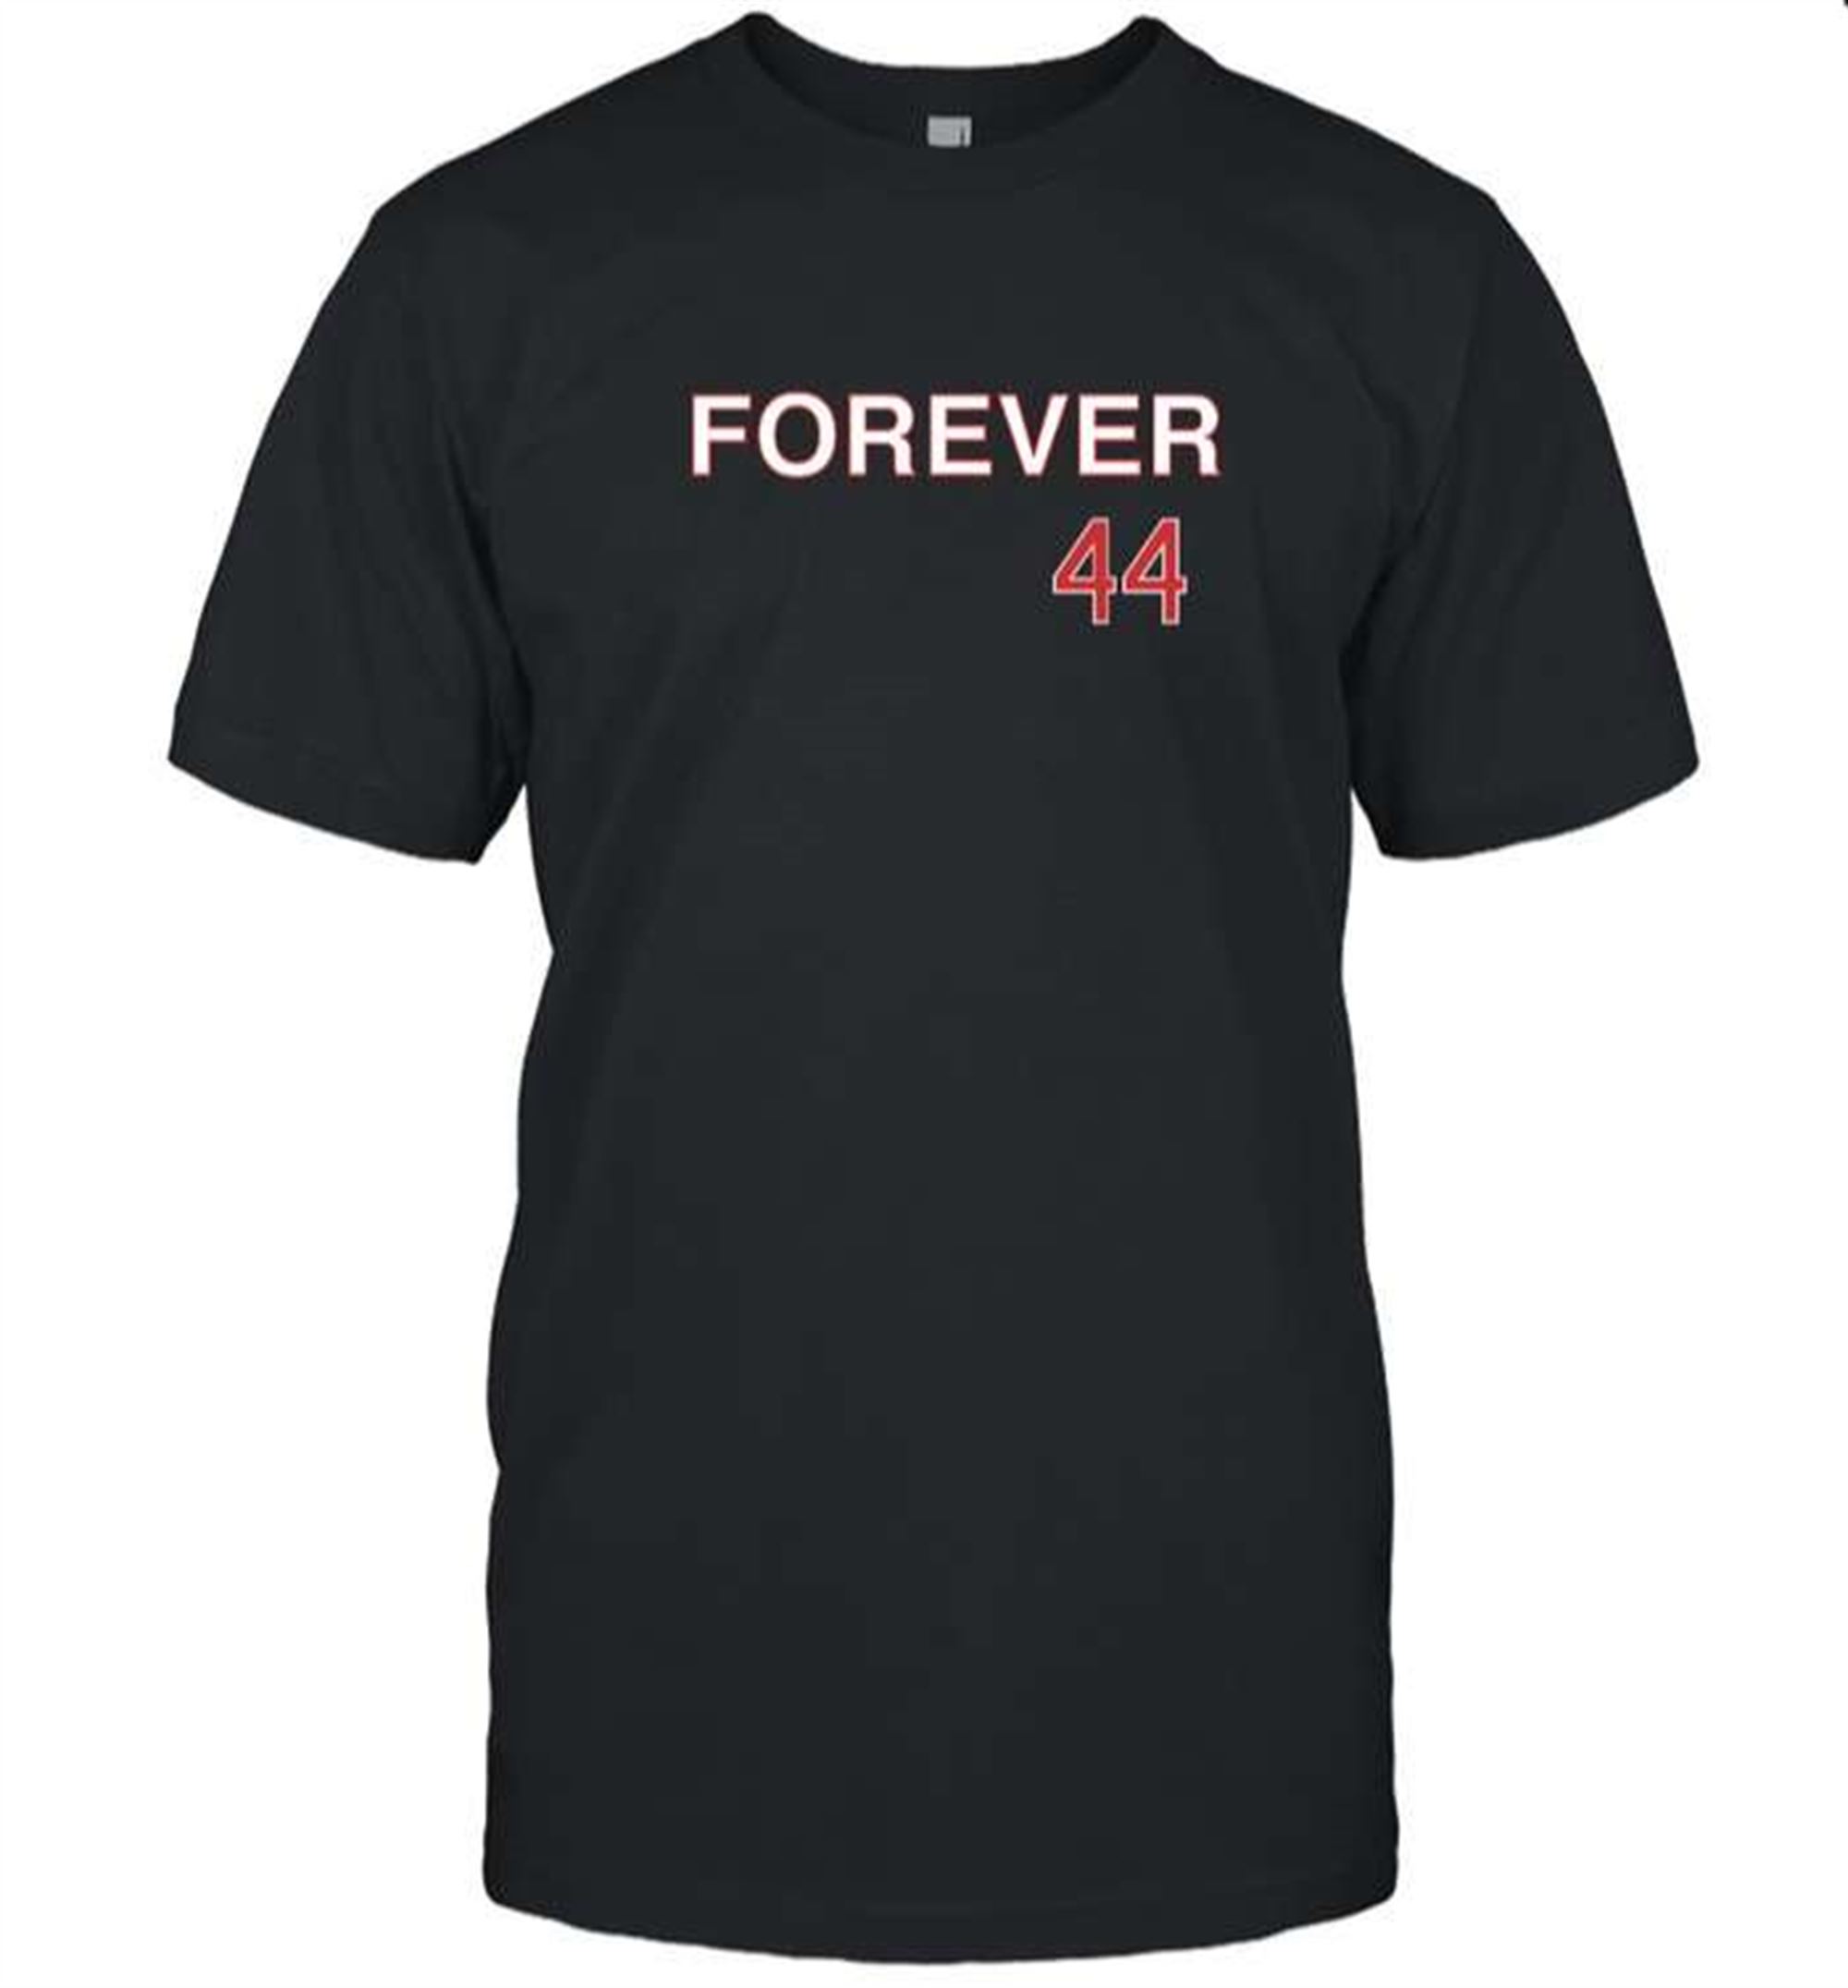 Obvious Shirts Chicago Cubs Anthony Rizzo Forever 44 T-shirt Size Up To 5xl